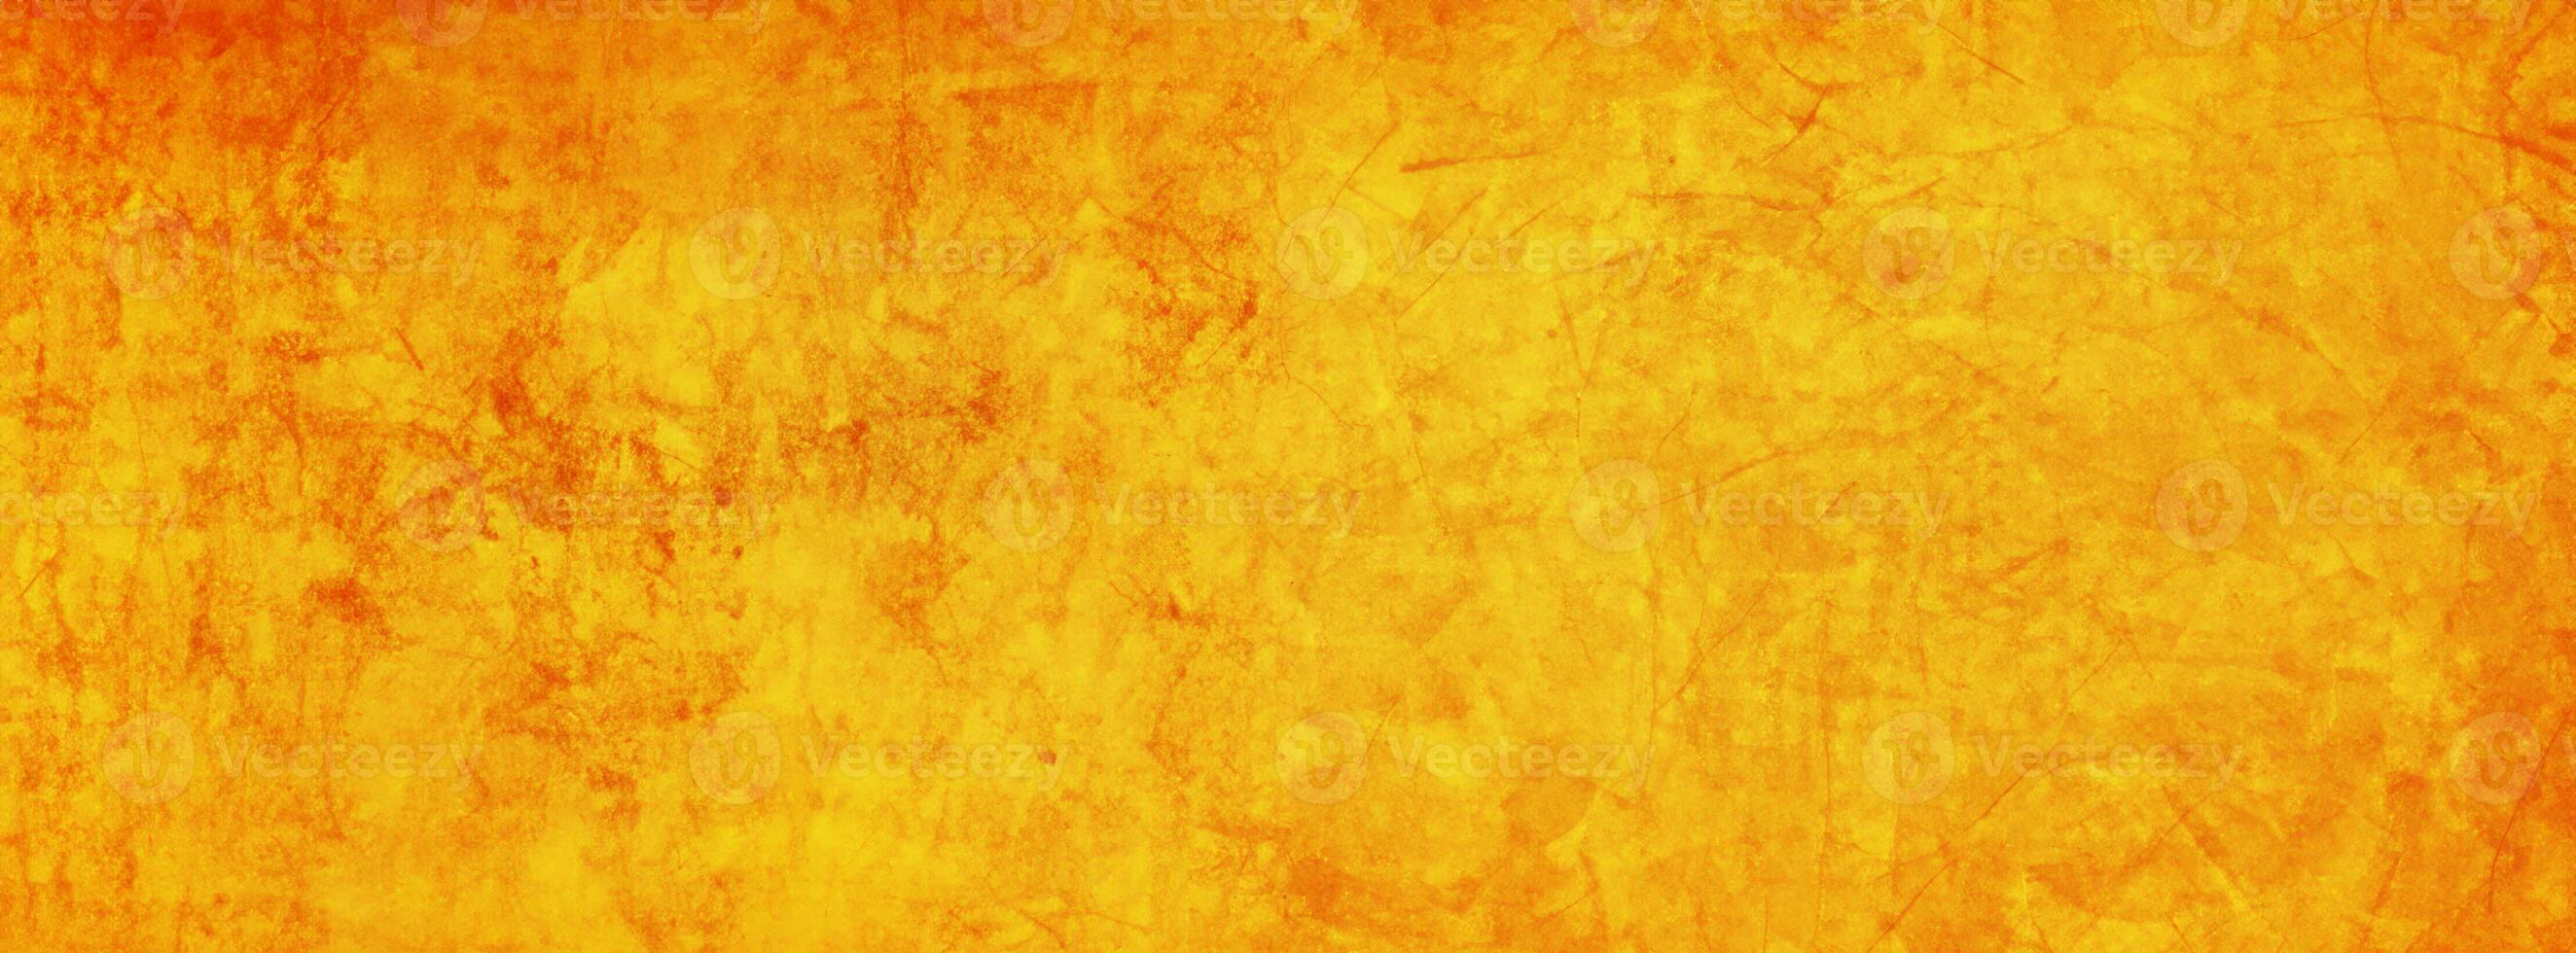 yellow and orange cement texture wall banner in summer background photo